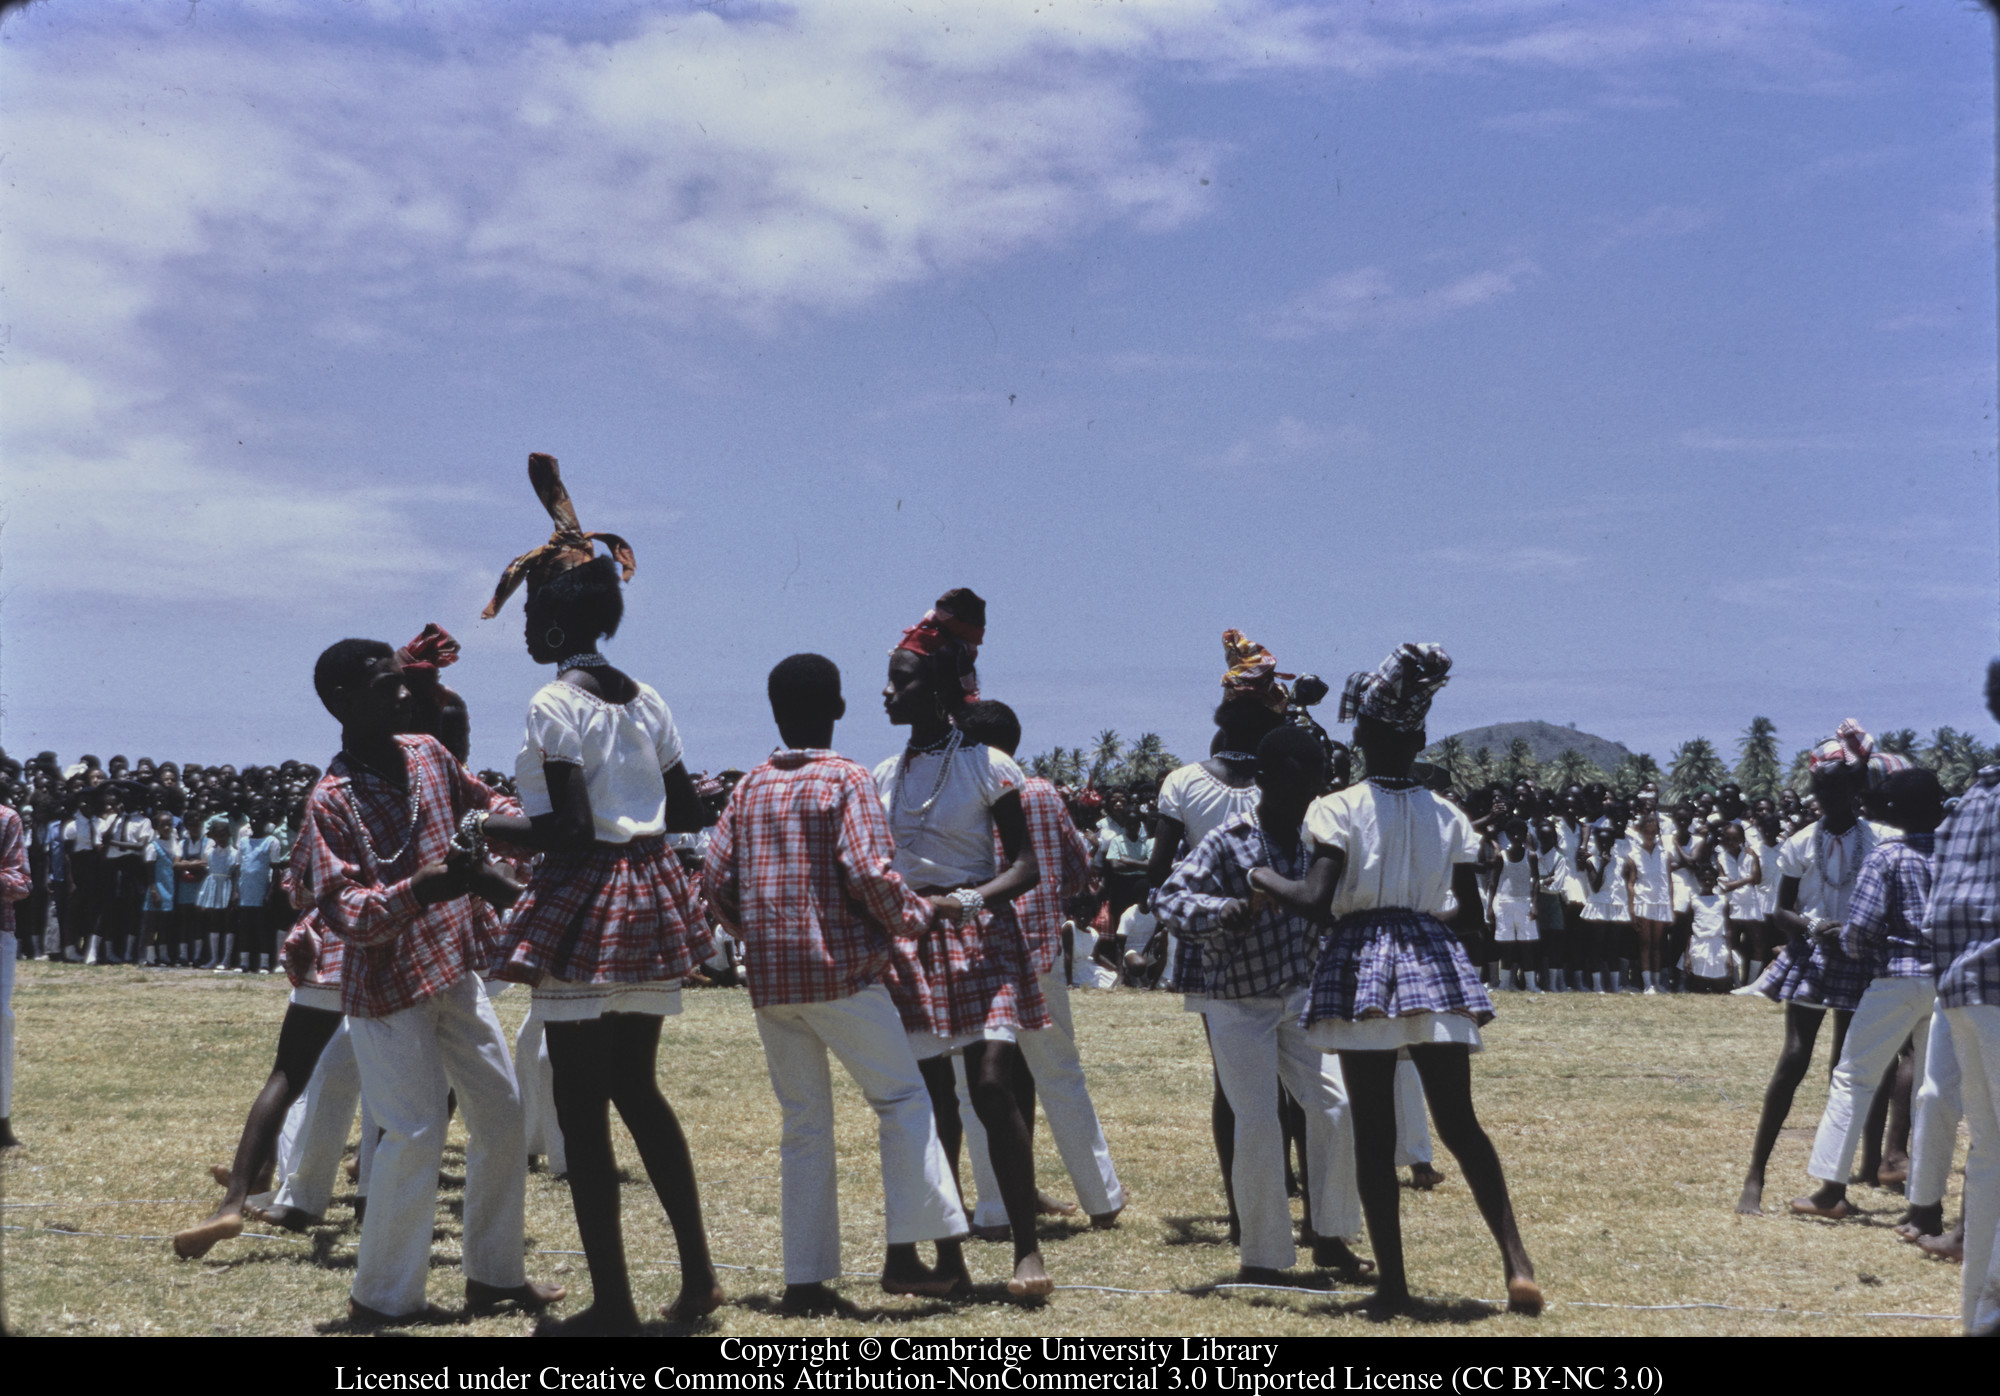 &#39;Development Day&#39; Youth Rally, Vieux Fort, 1 May 71, 1971-05-01